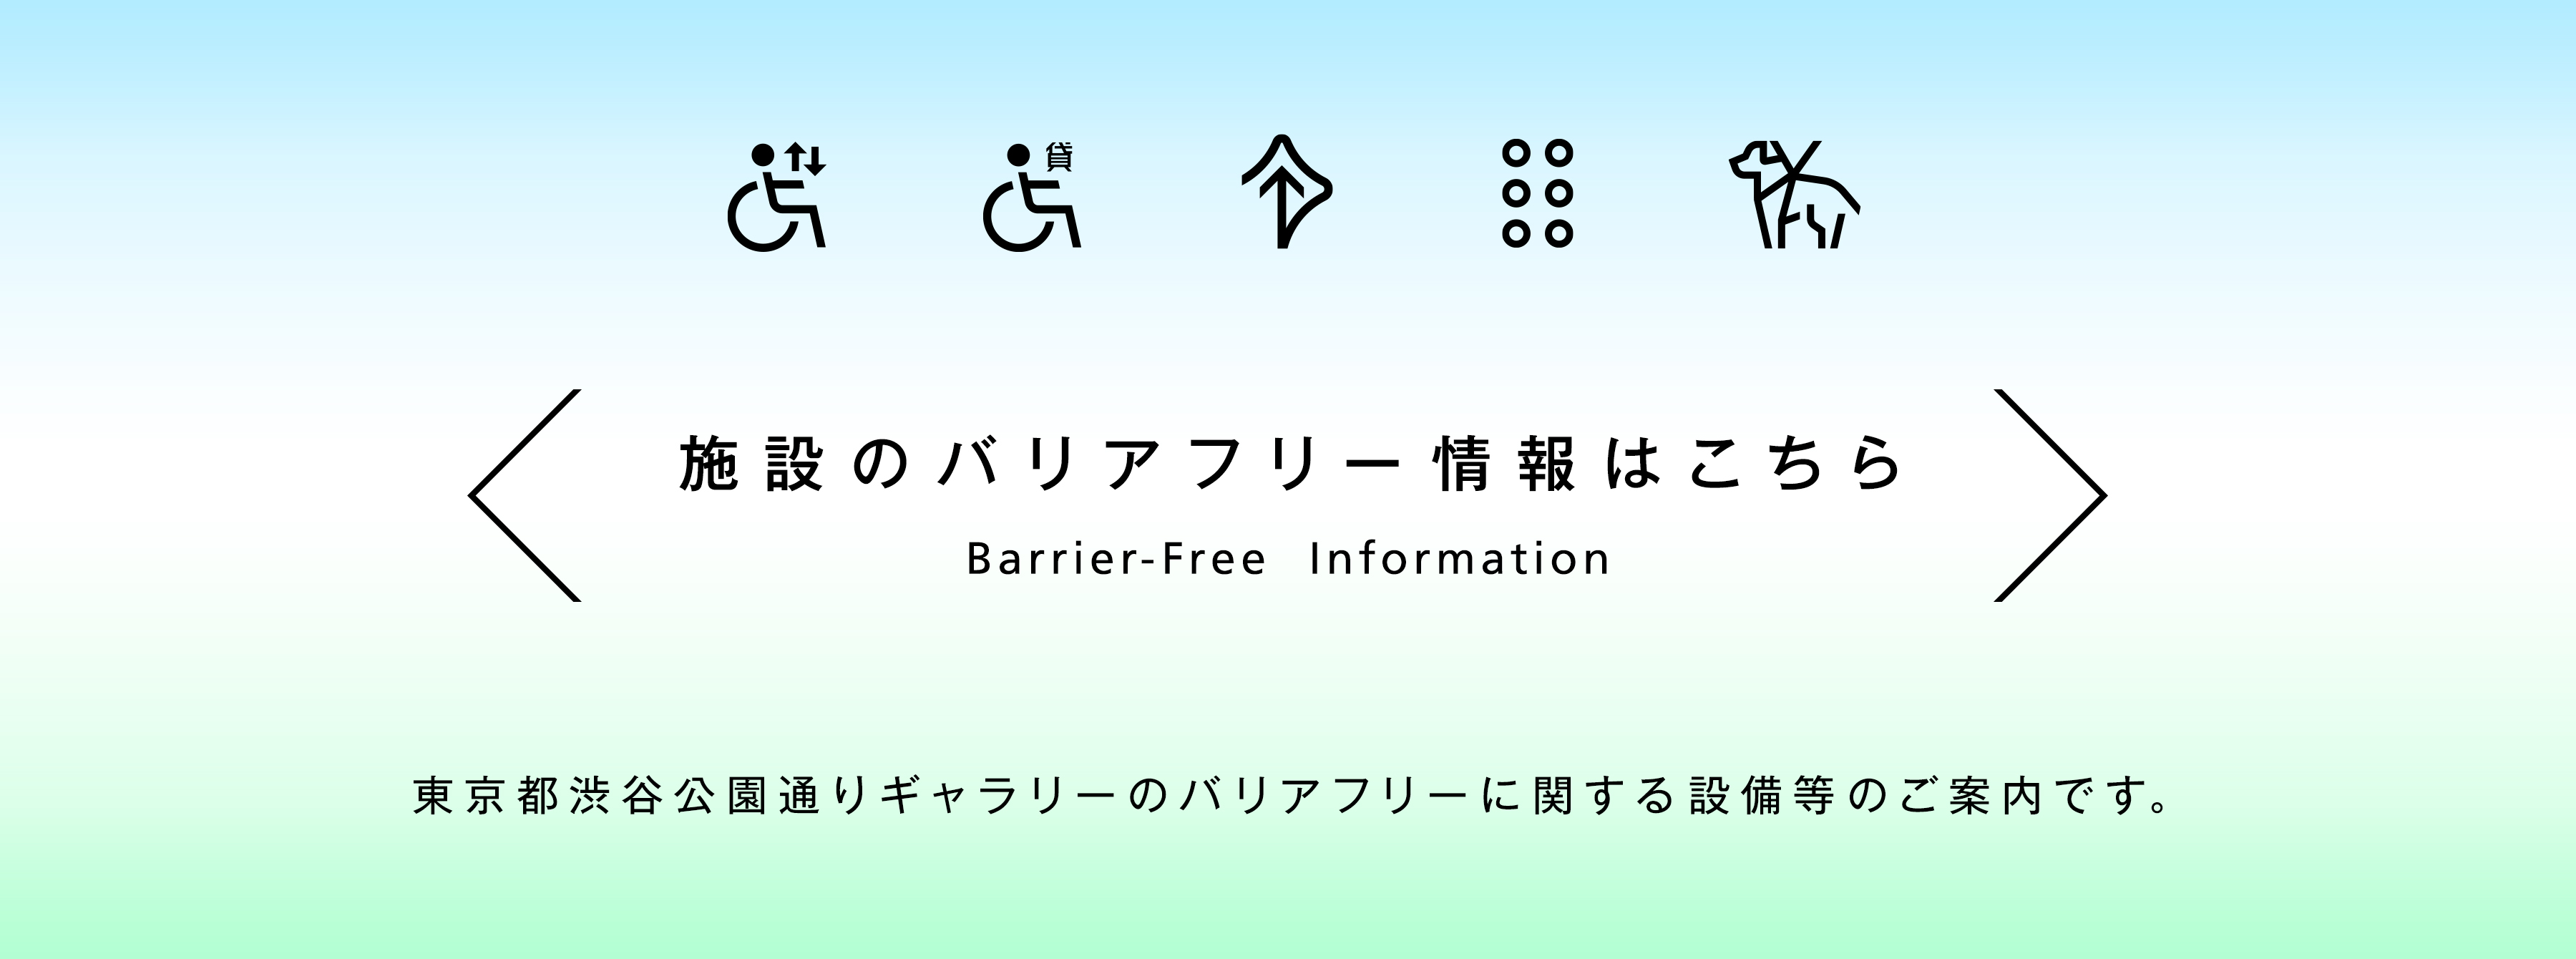 Barrier-Free